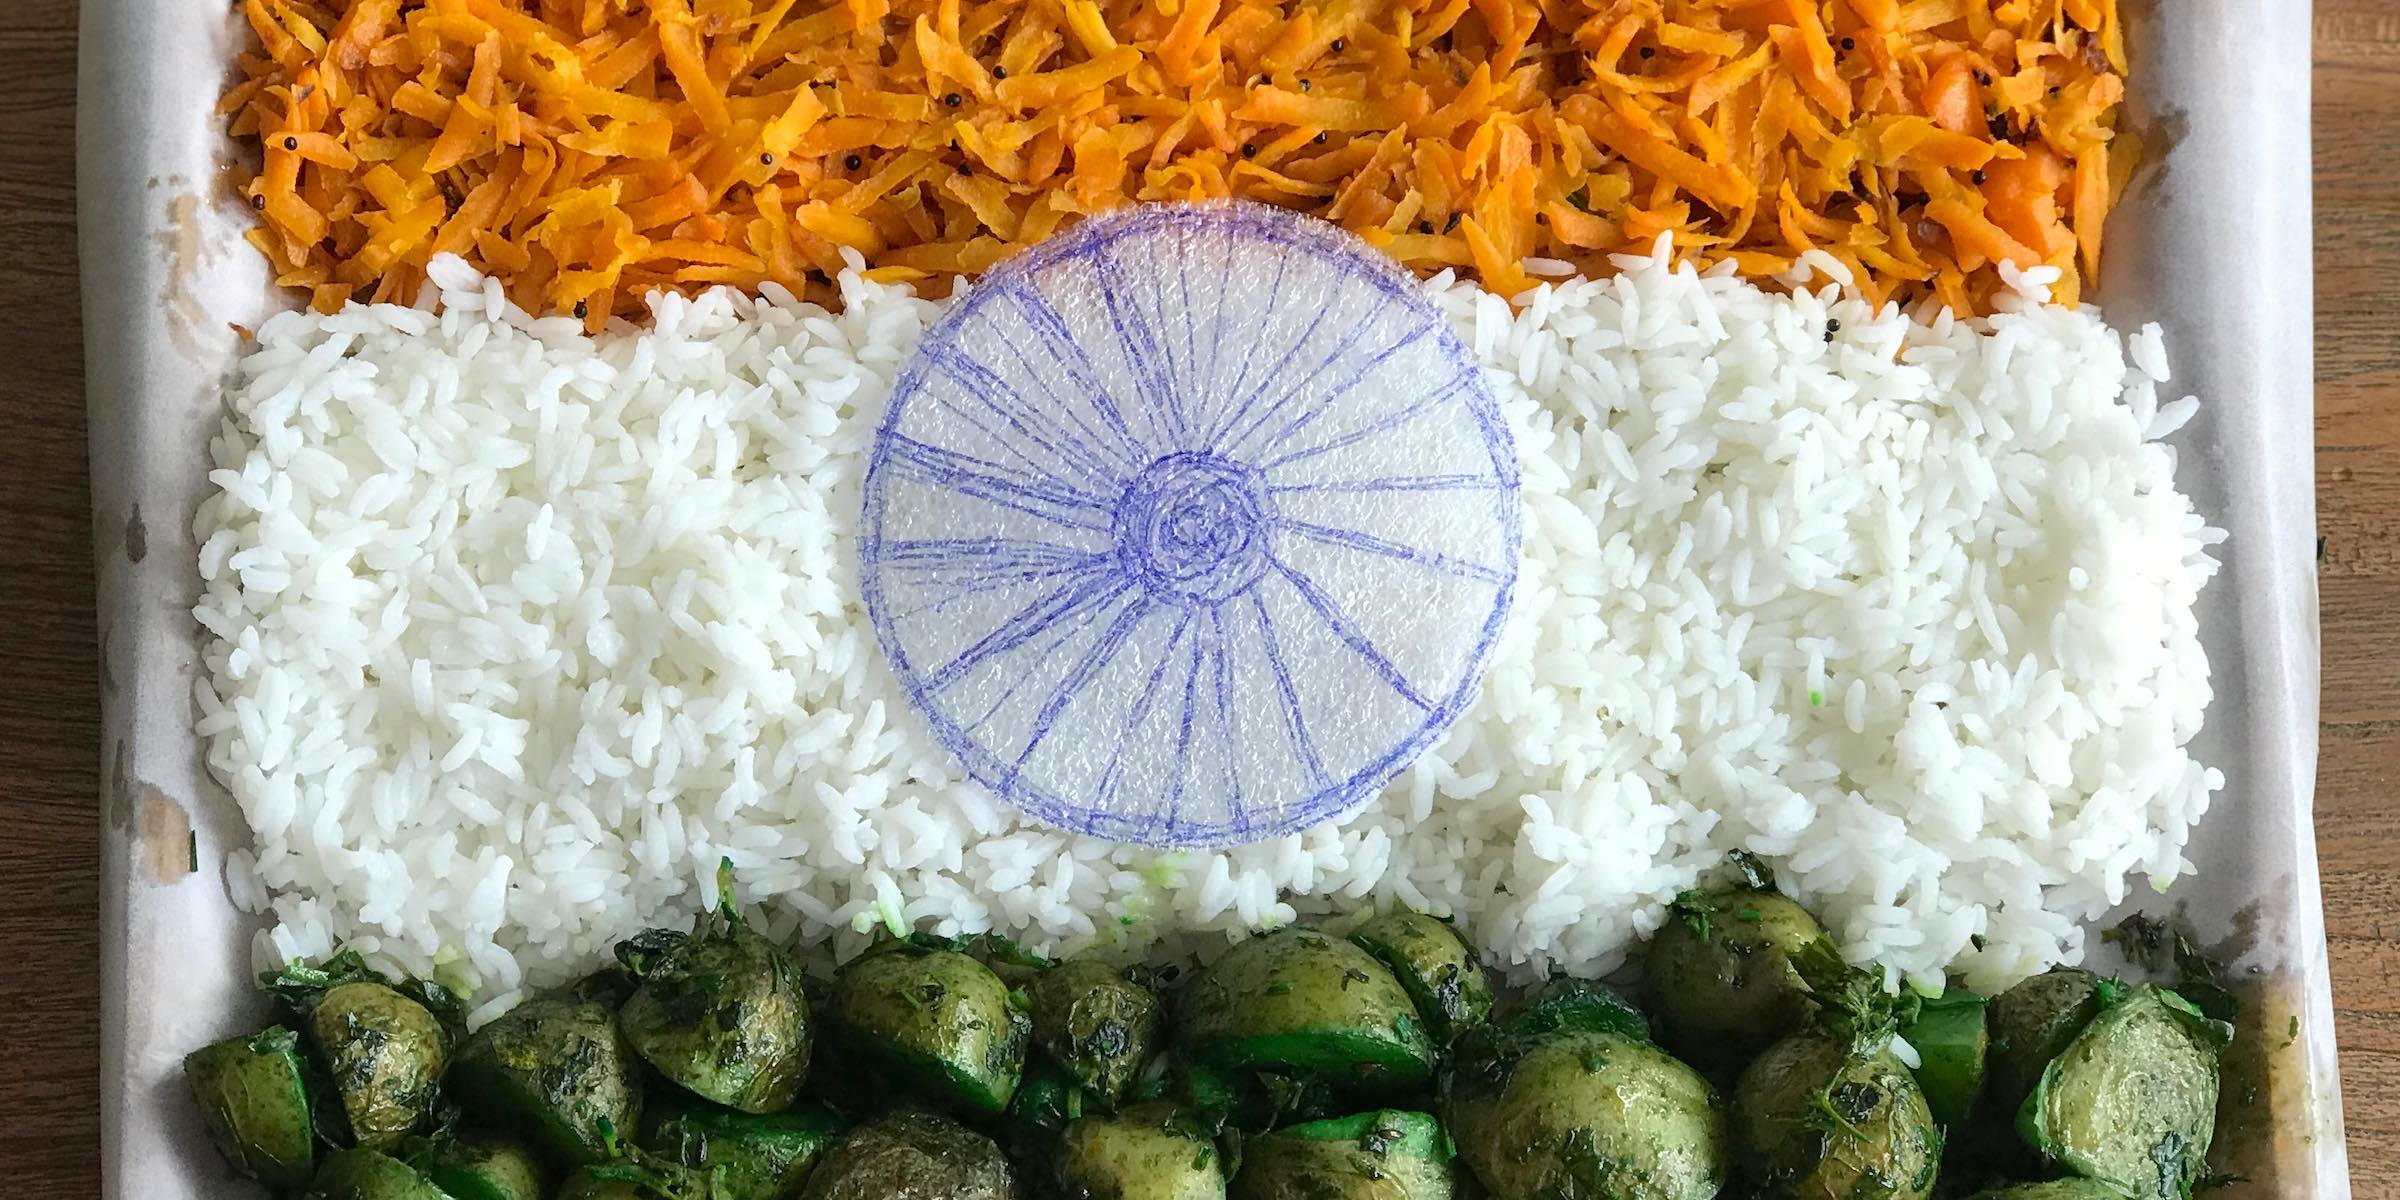 Tricoloured food to celebrate Indian Republic Day